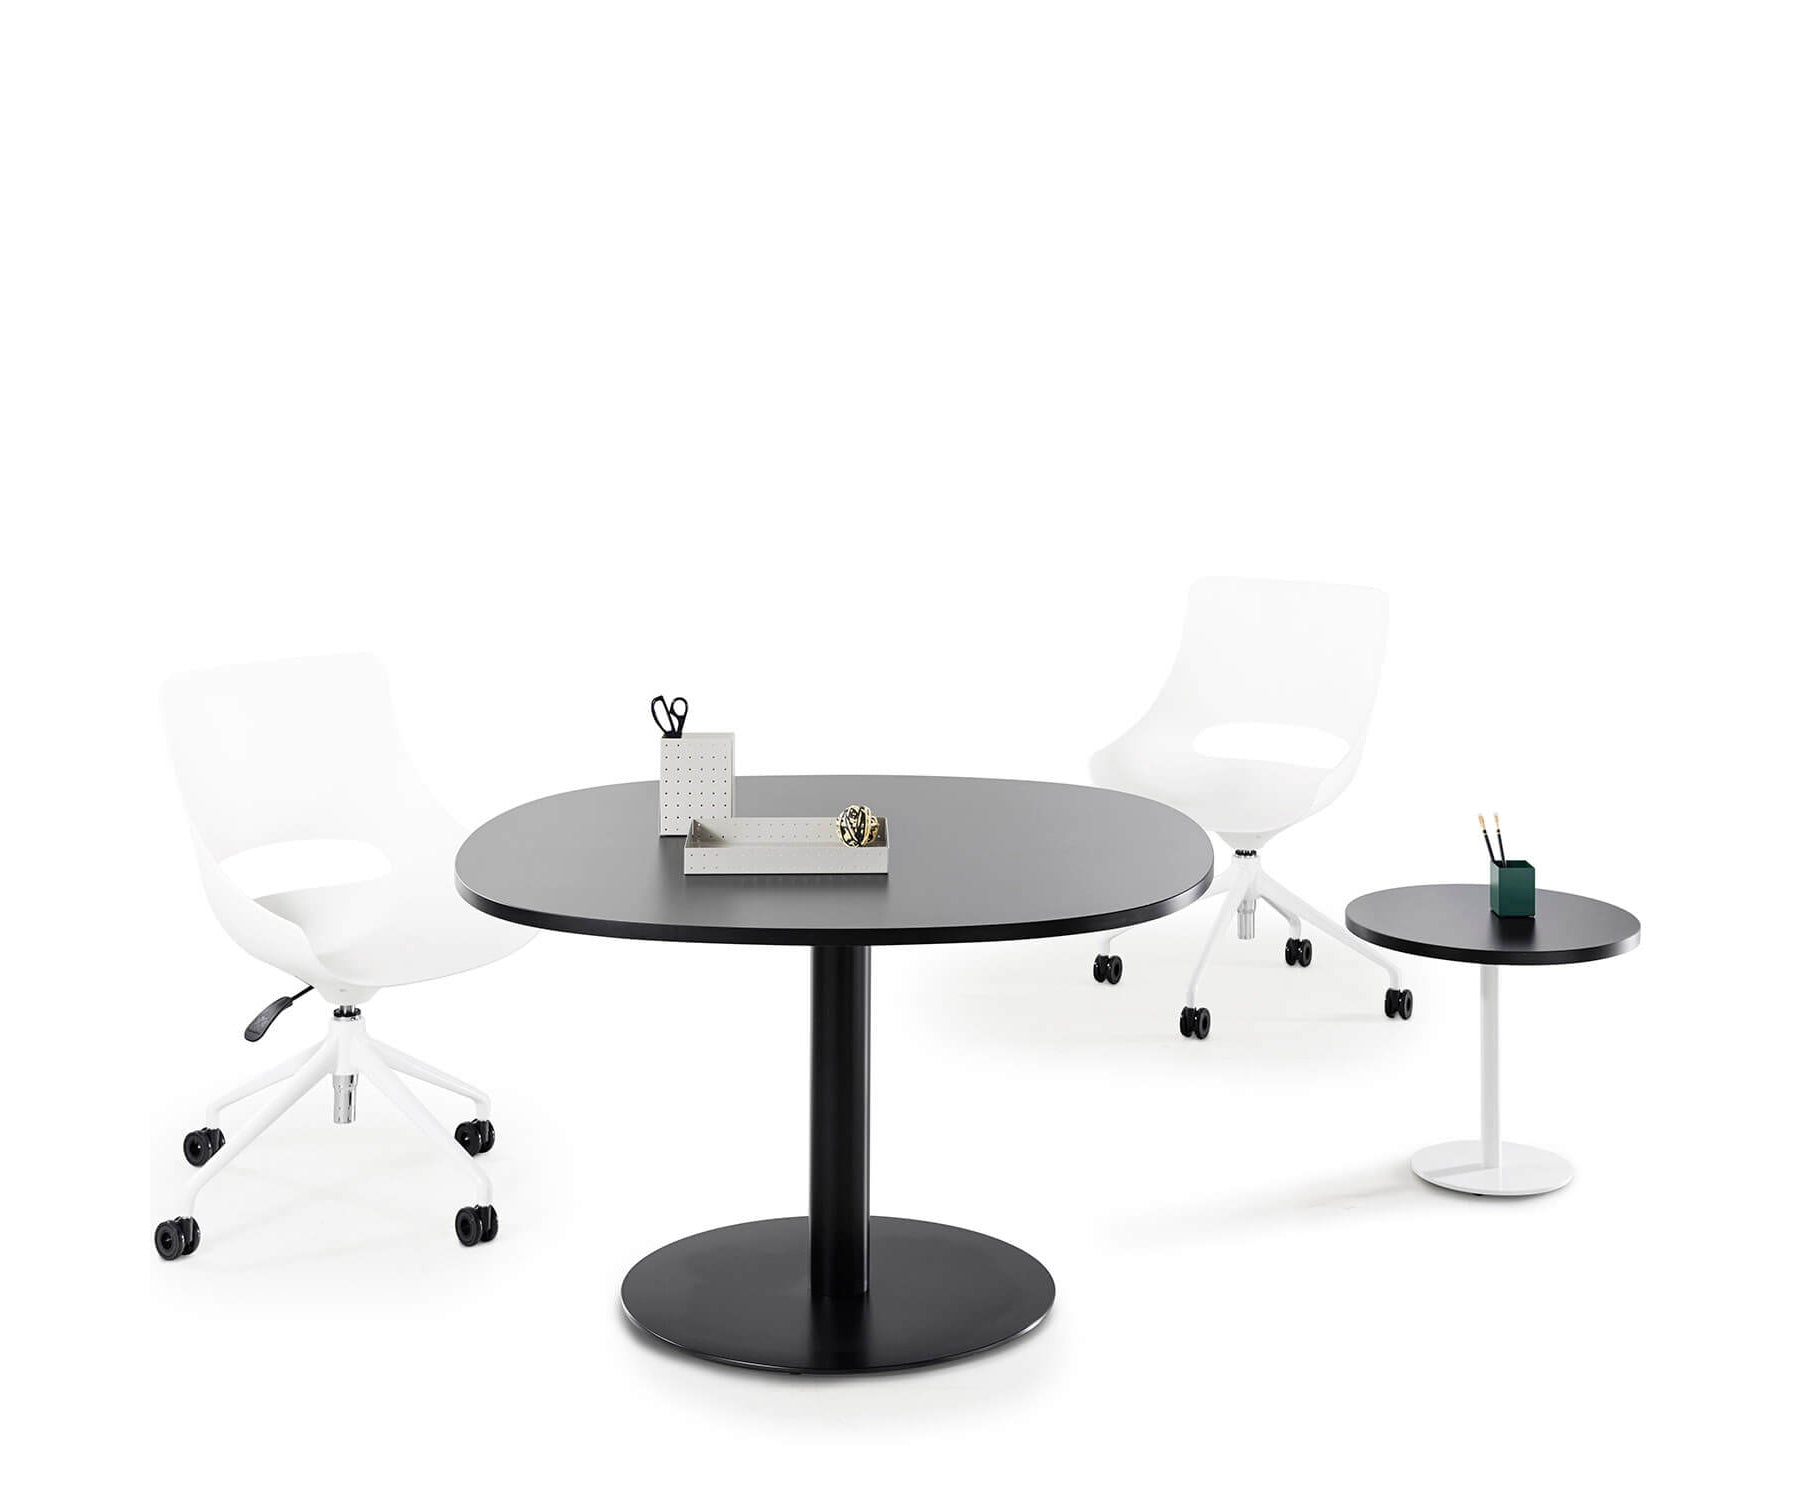 Thinking Works Disc Base Table